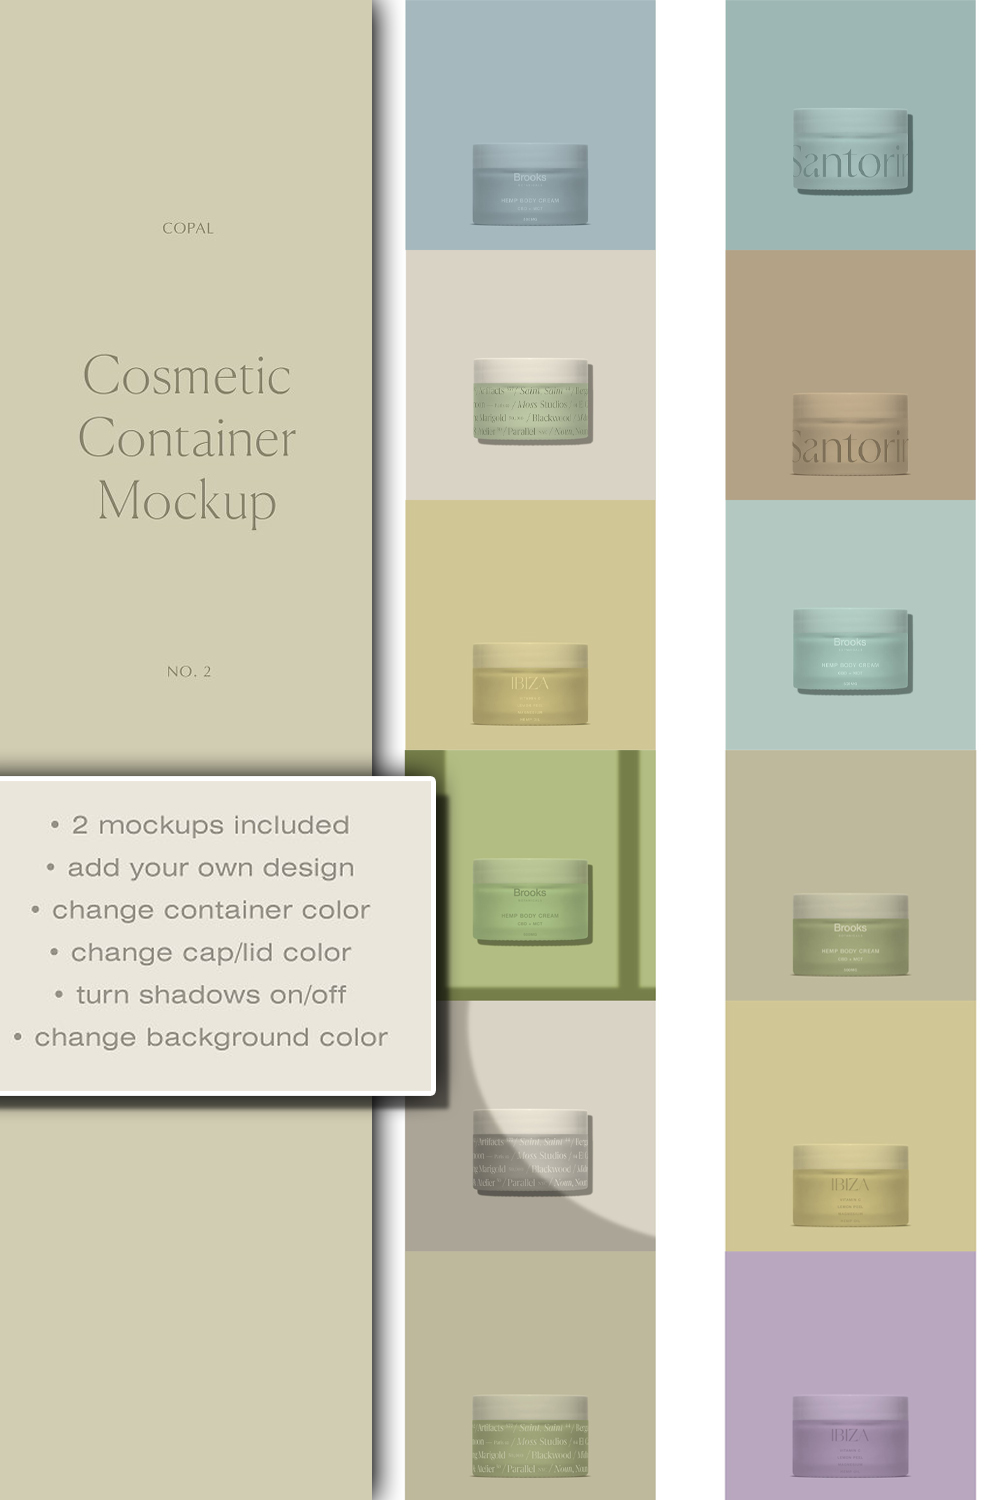 Cosmetic container mockup of pinterest.